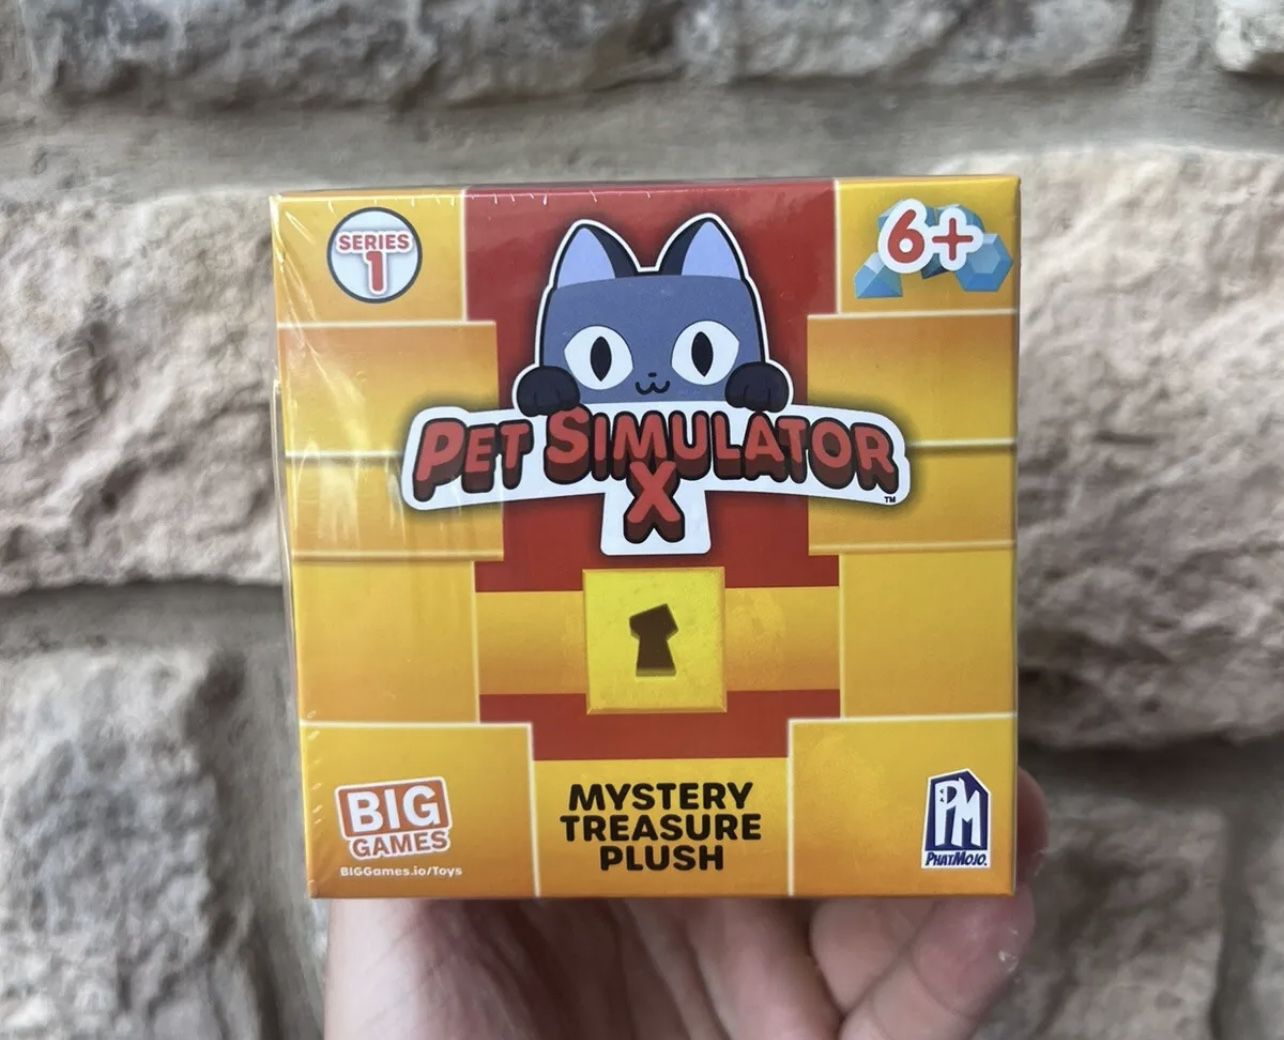 Big Games Pet Simulator X Dog Plush w/ Redeemable Code Included NEW IN HAND  for Sale in Buena Park, CA - OfferUp